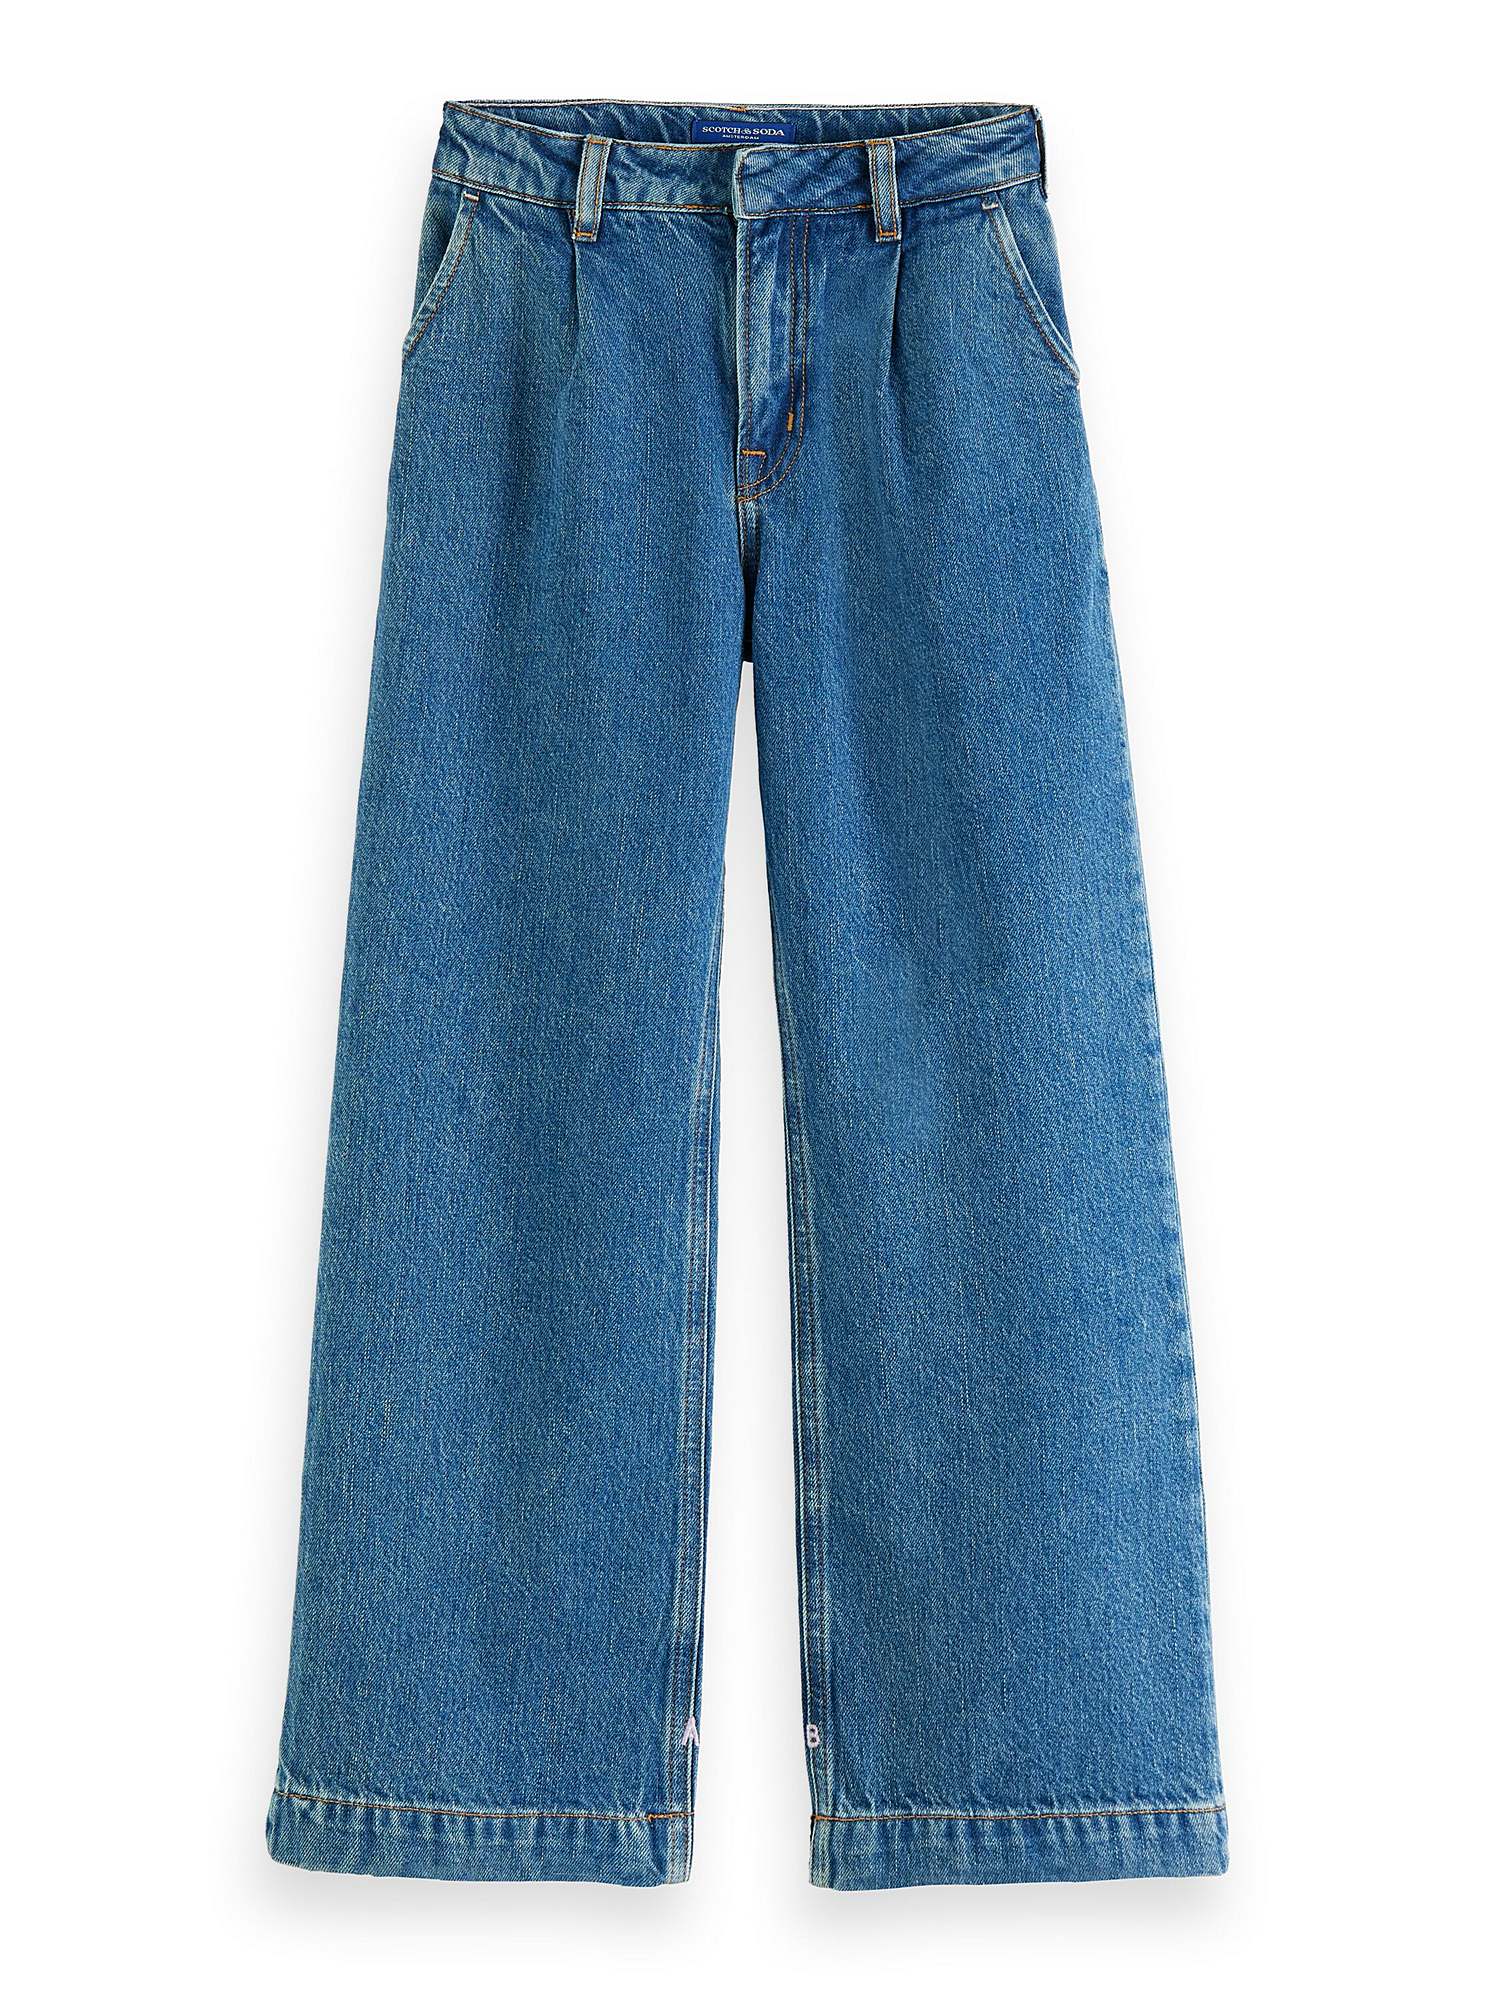 Scotch Soda Girls Tide Balloon Fit Jeans - Washed